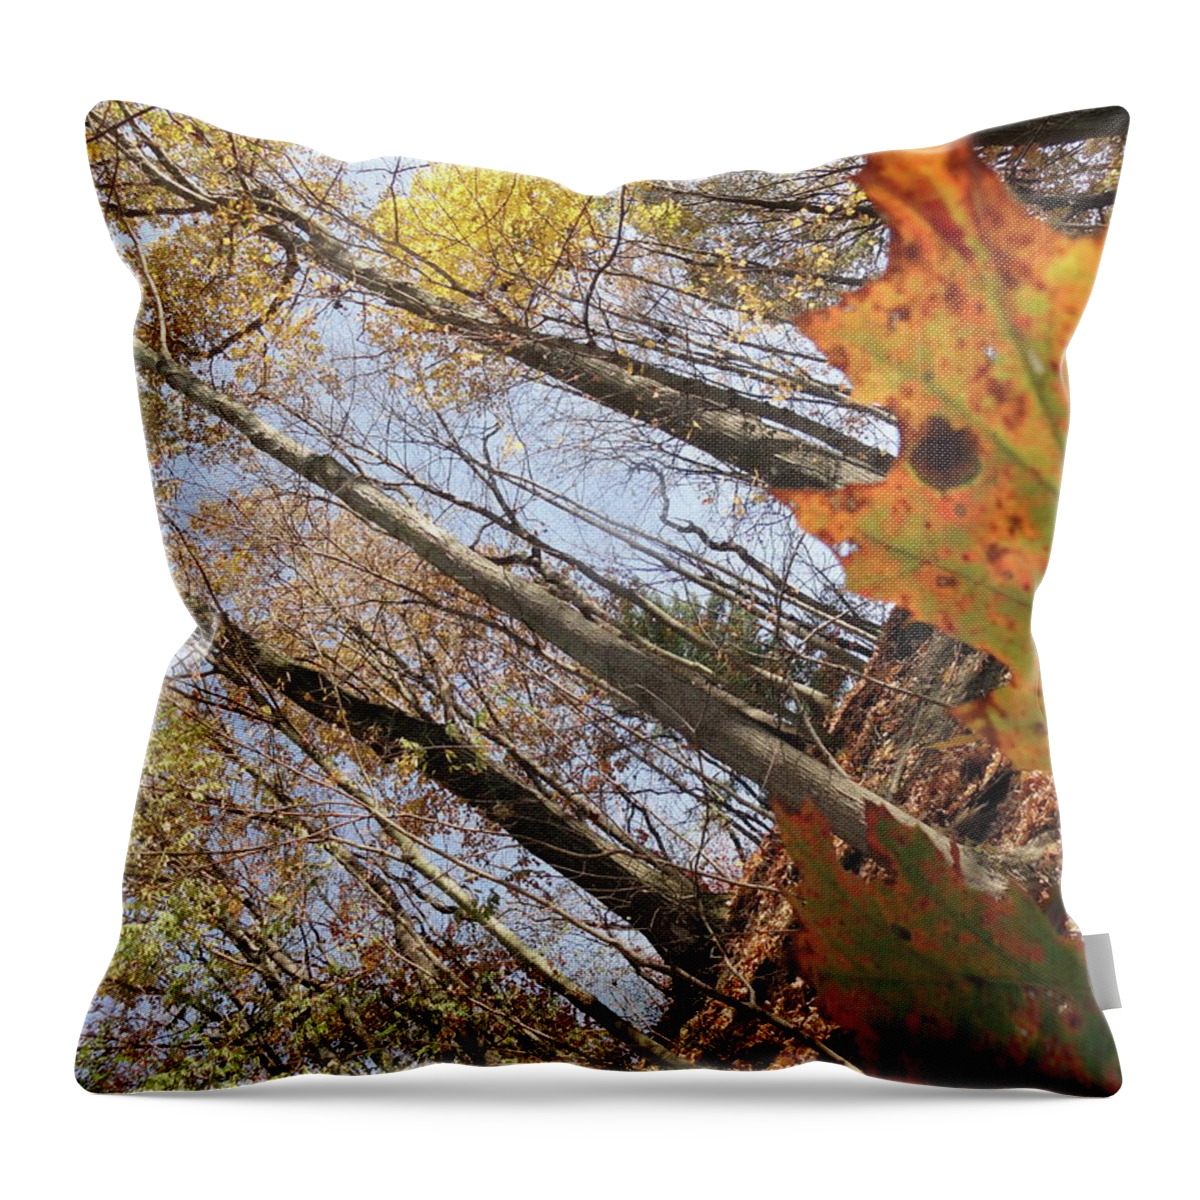 Leaves Throw Pillow featuring the photograph Leaf Peepers by Trish Hale